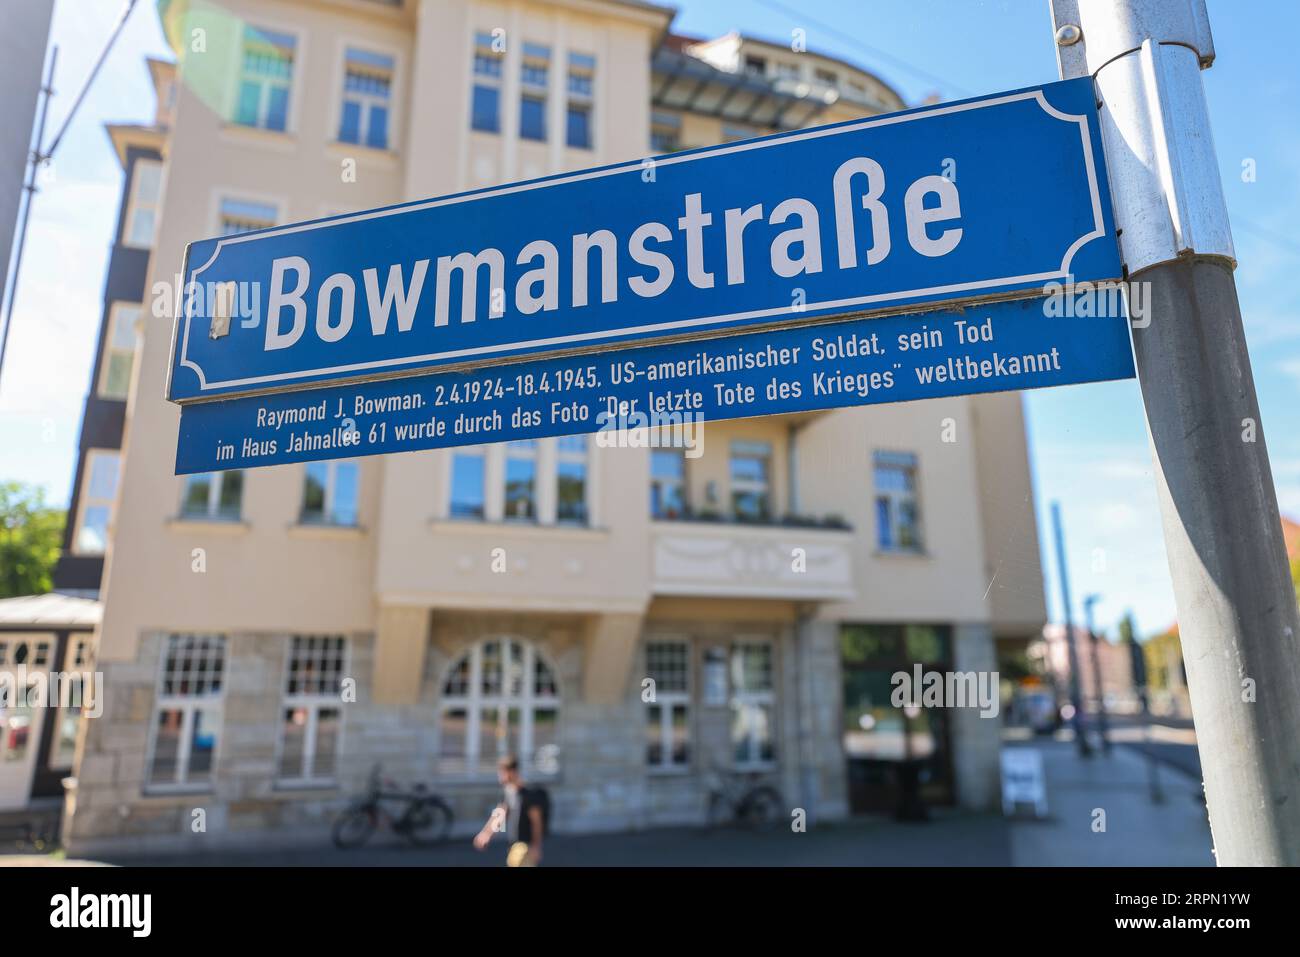 05 September 2023, Saxony, Leipzig: A street sign identifies Bowmanstrasse at the 'Capa House'. The exhibition, event and meeting place in the house will be permanently open again from September. The world-famous photograph 'The Last Dead Man of the War,' by American war photographer Robert Capa, was taken in the building. It shows U.S. soldier Raymond J. Bowman being shot on a balcony of the house on April 18, 1945, when the Americans liberated Leipzig. A stretch of street by the Capa House has borne his name for years. Photo: Jan Woitas/dpa Stock Photo